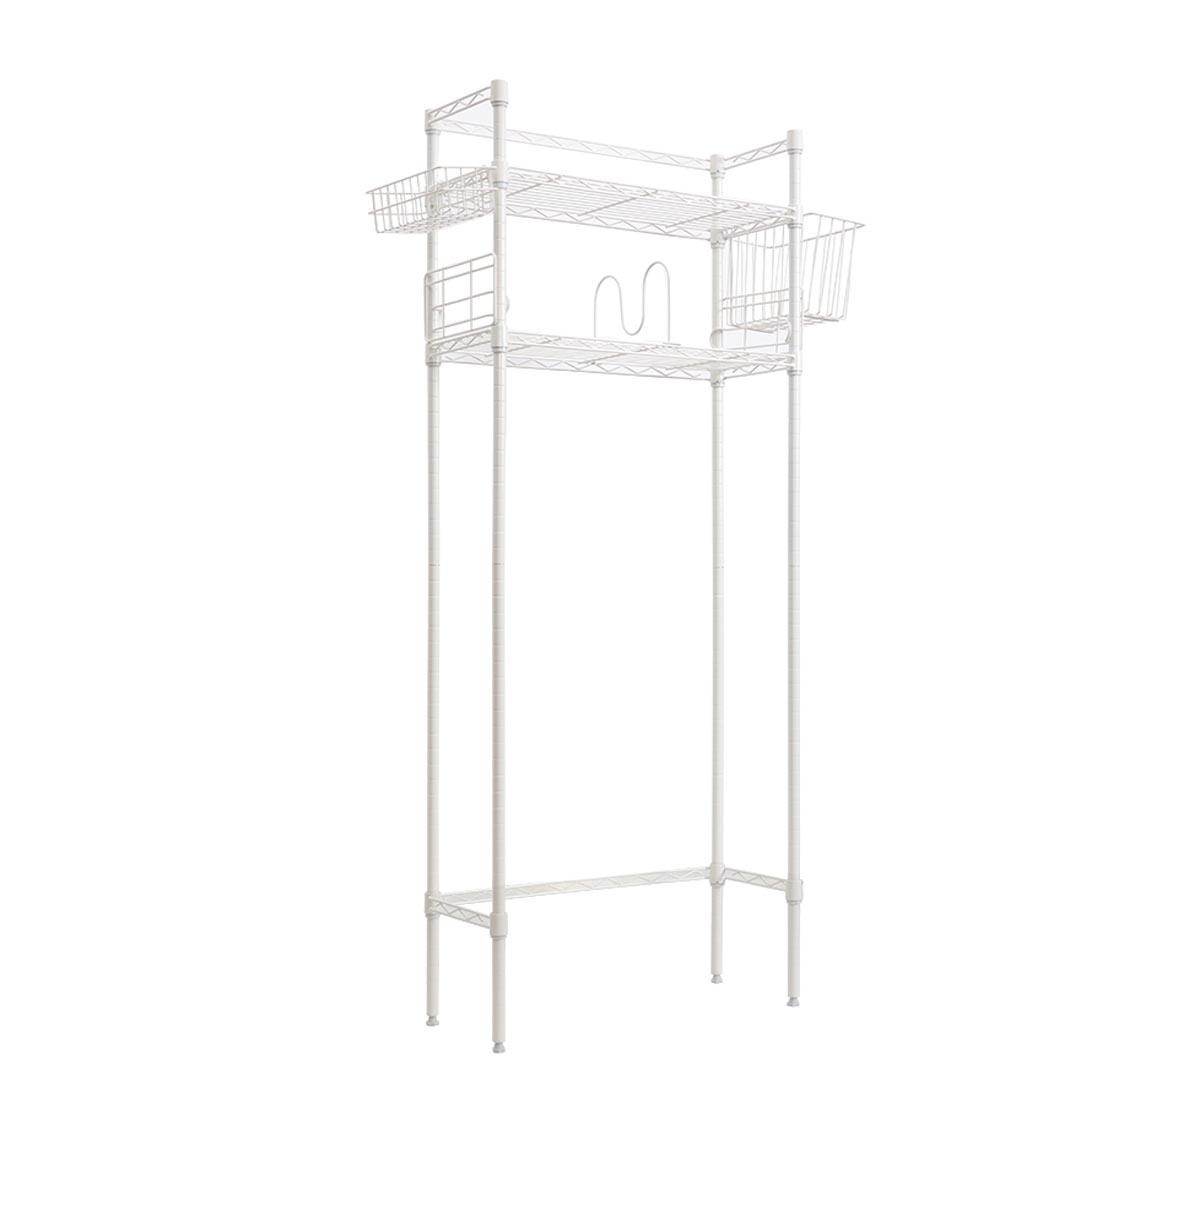 plastic storage shelving unit.How to identify the quality of heavy-duty shelves?